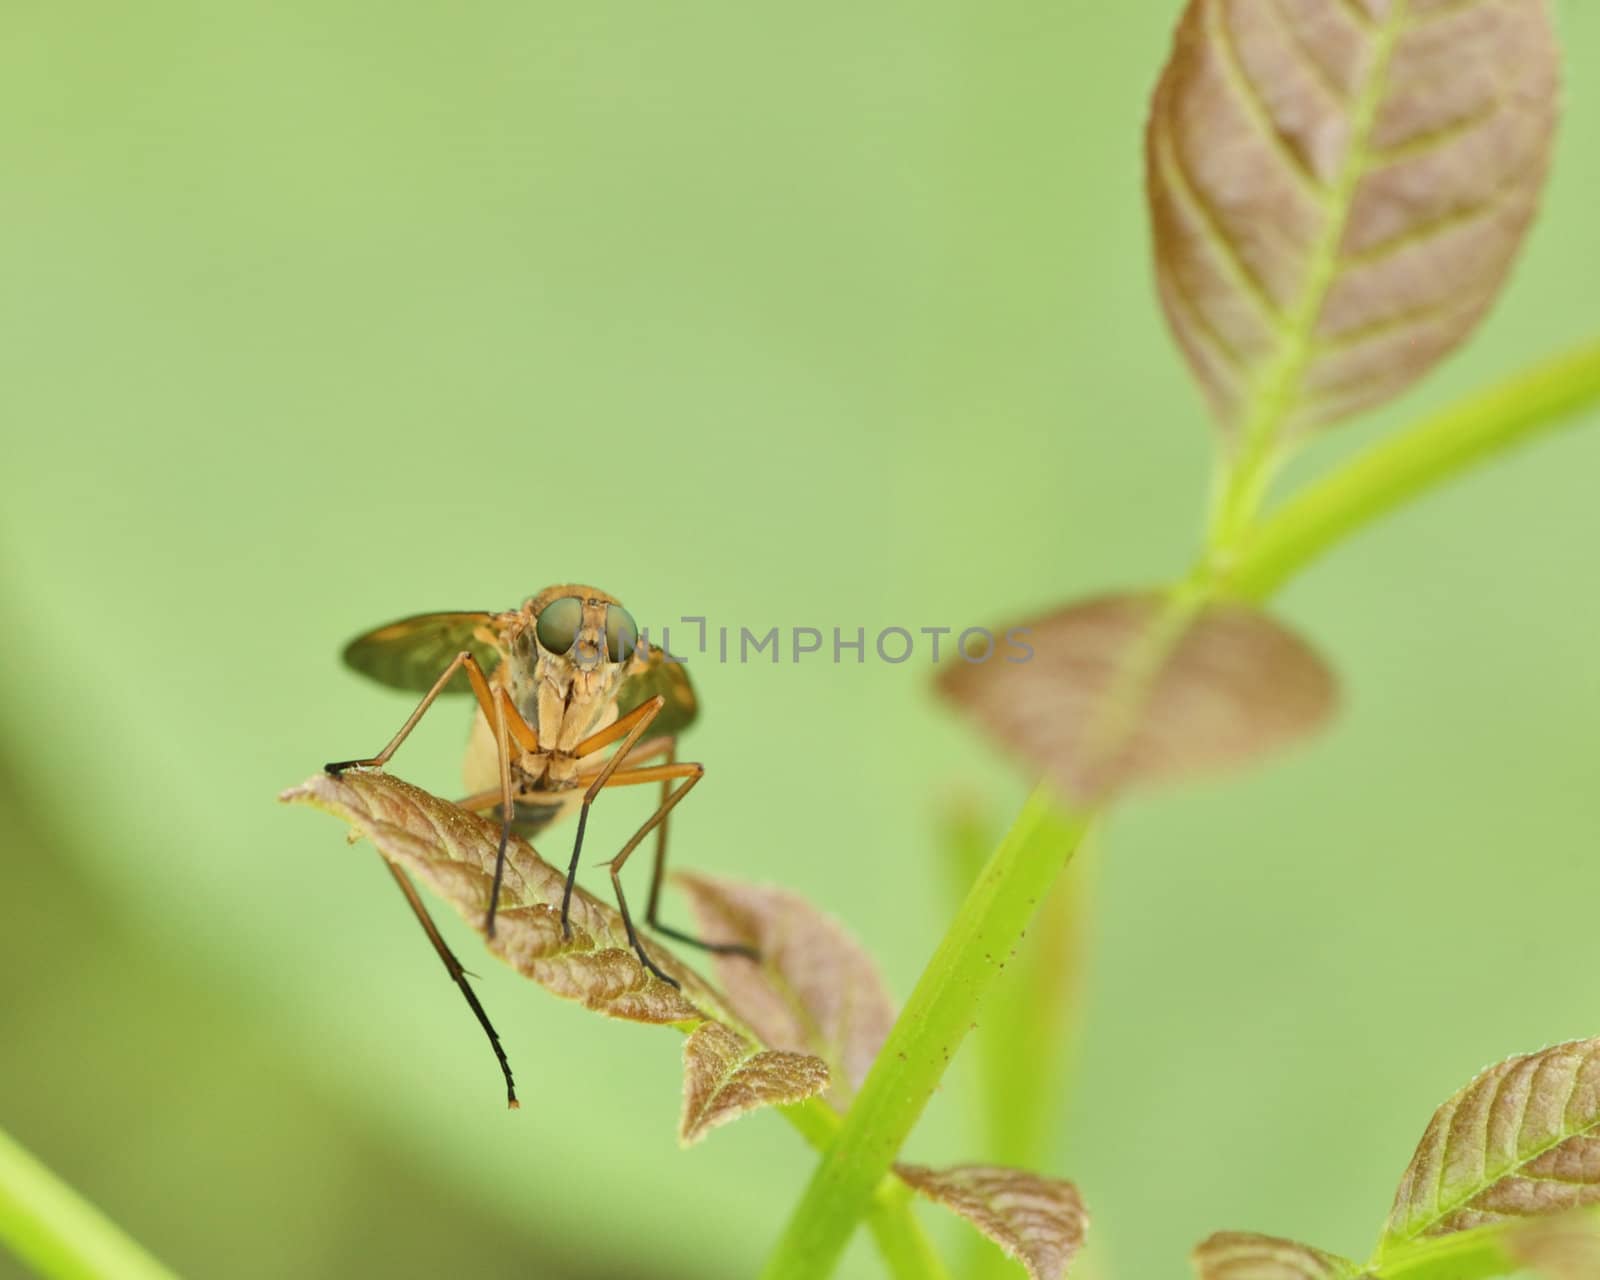 Marsh Fly perched on a plant leaf in a swamp.